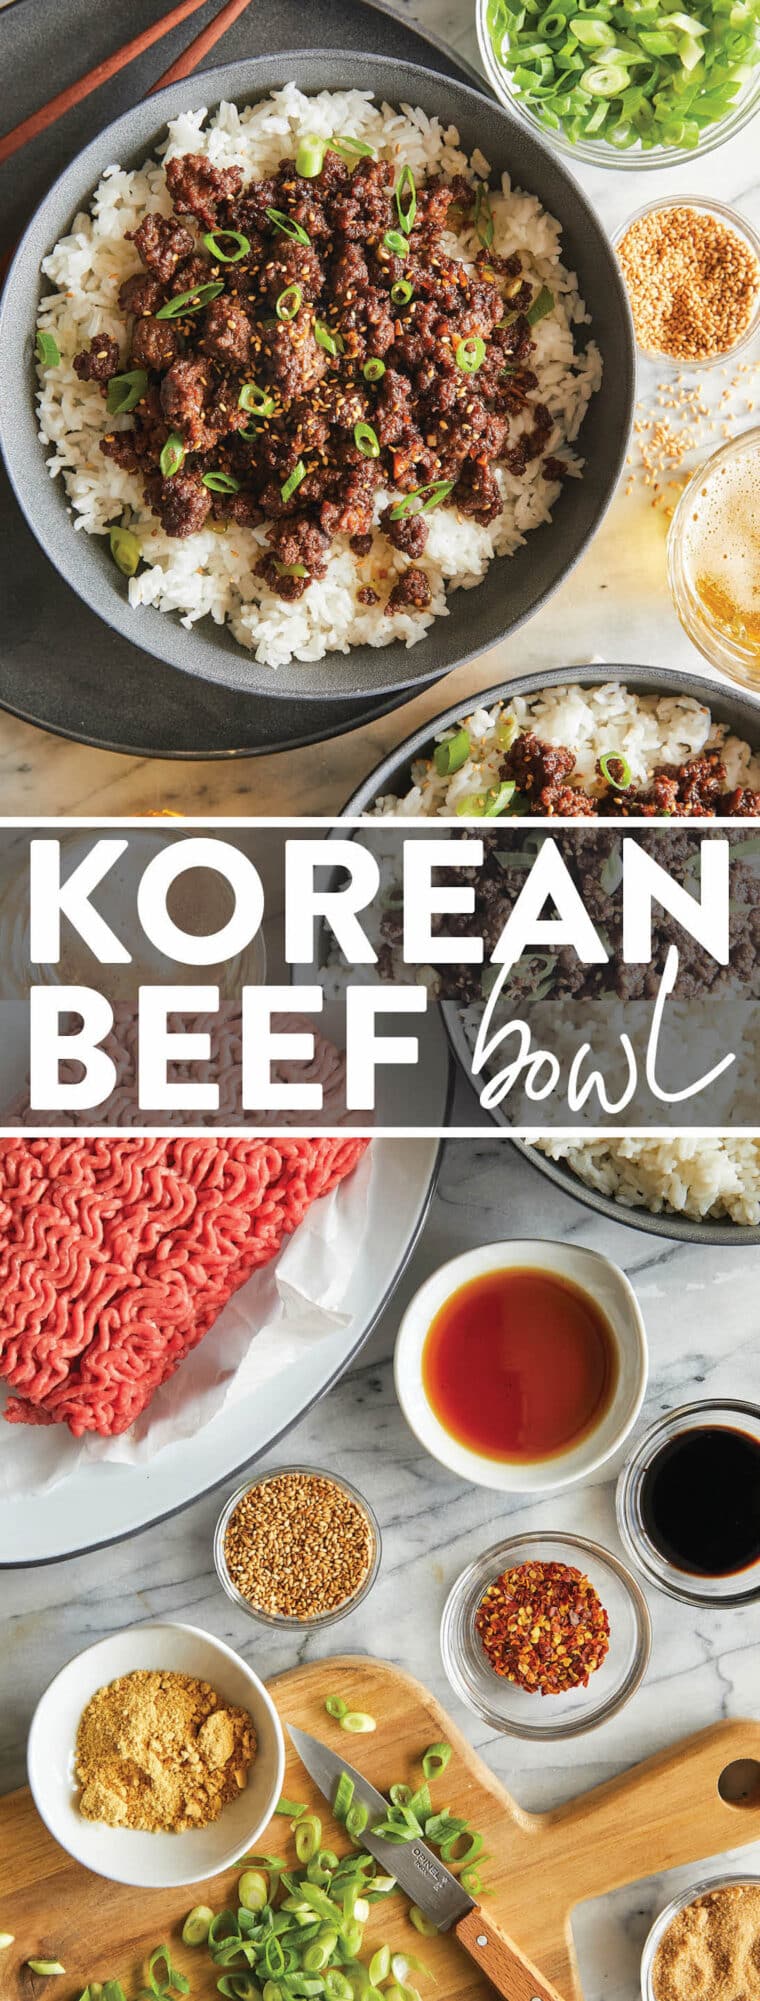 Asian Ground Beef Bowl - The flavours of kitchen